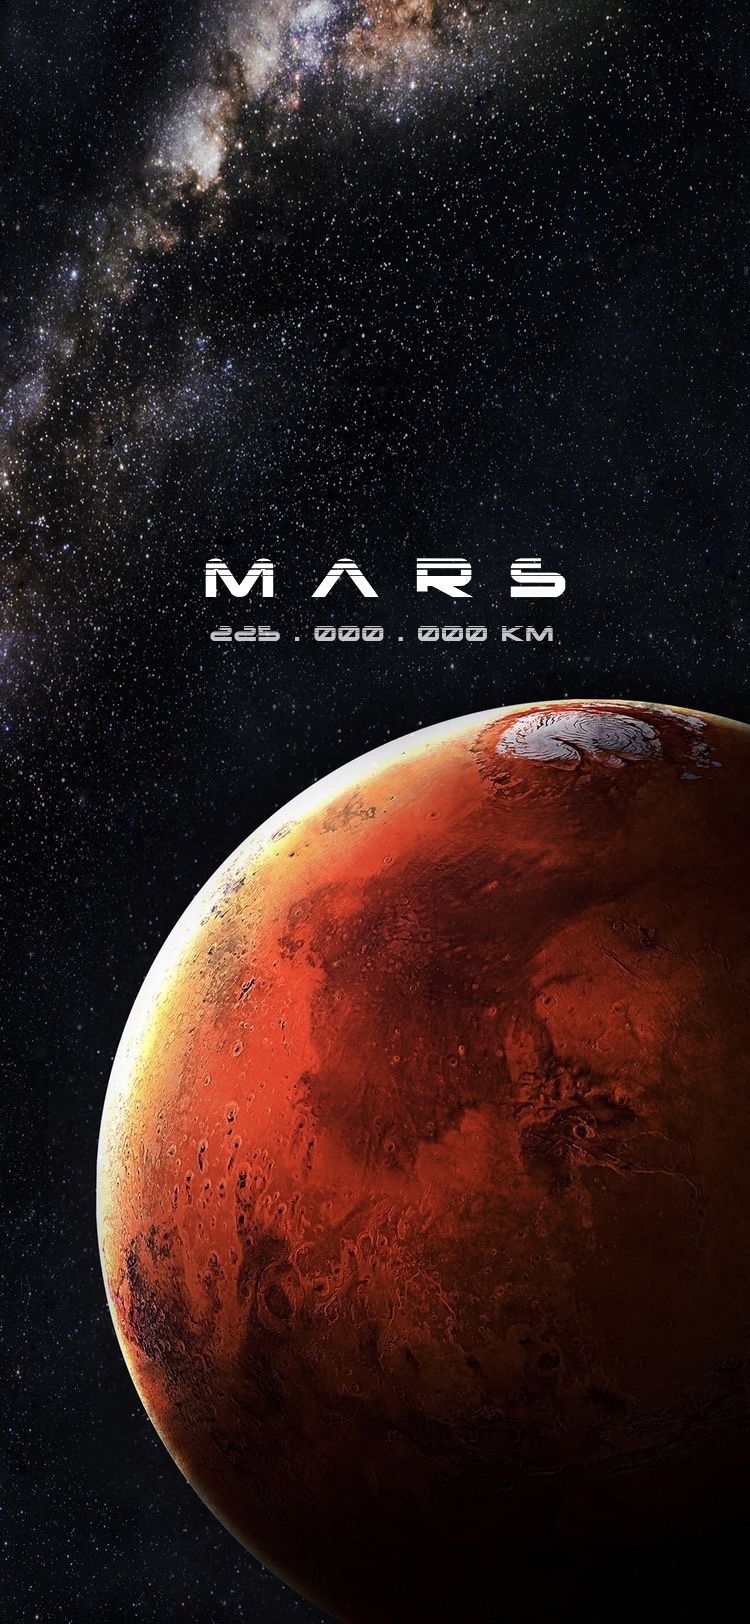 IPhone wallpaper of the planet Mars - Mars